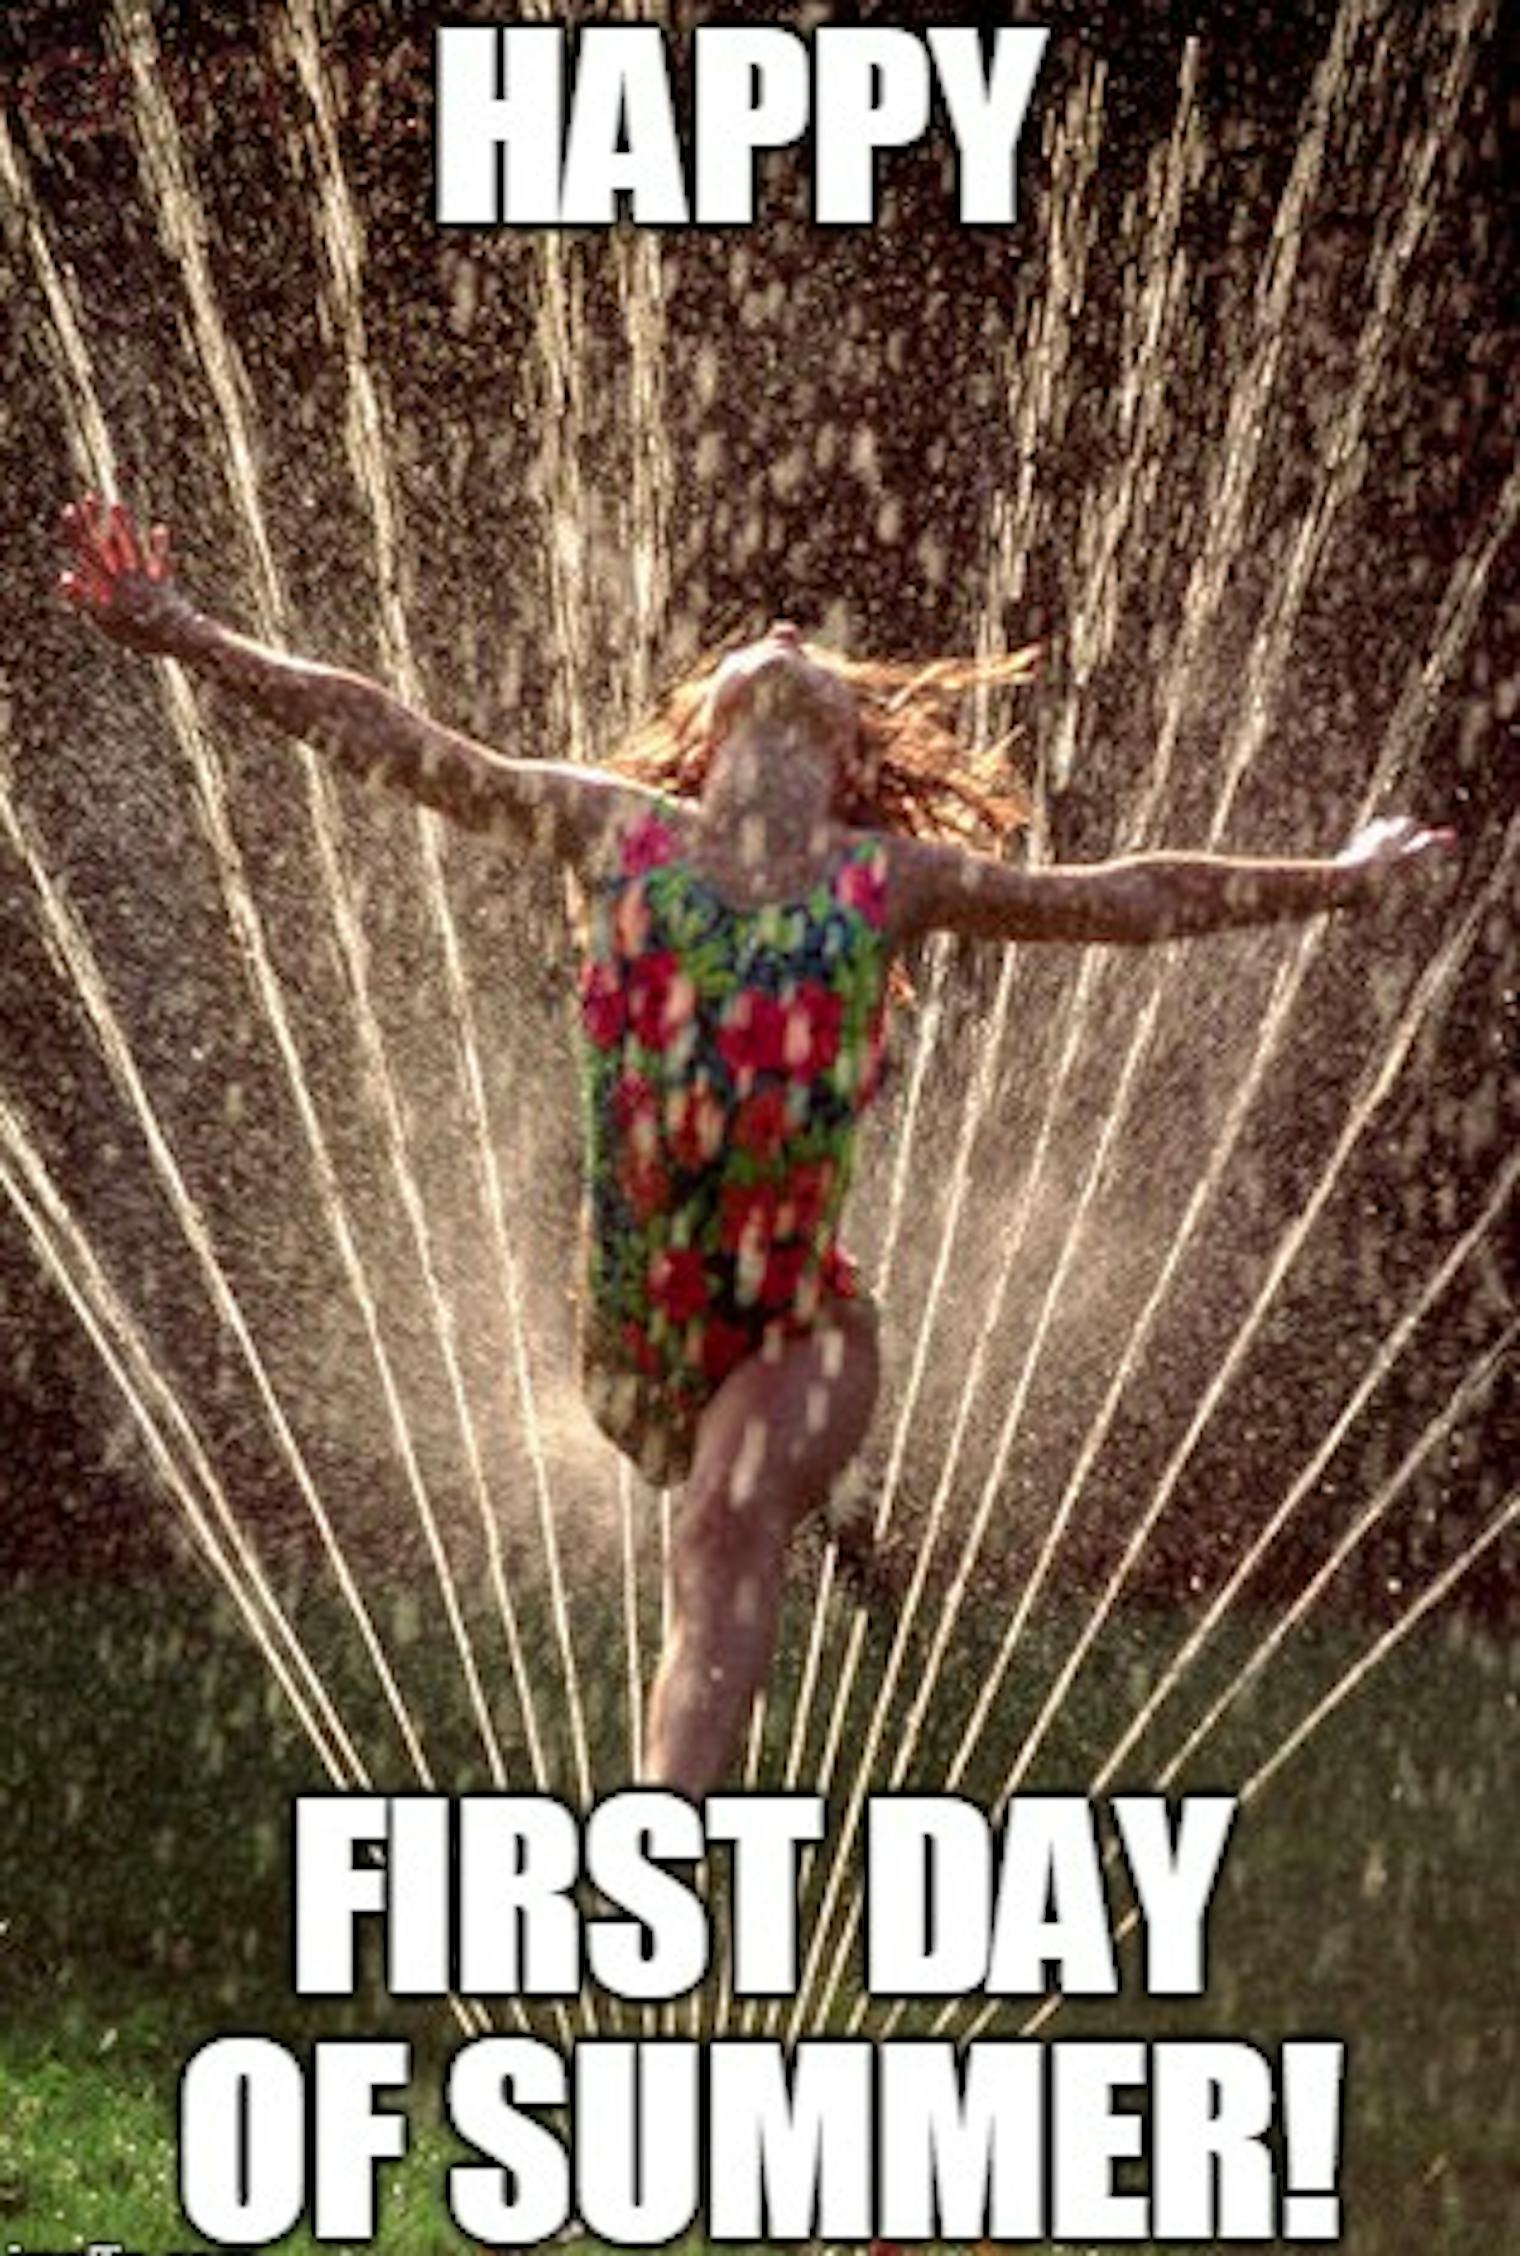 Memes About The First Day Of Summer, Because There's No Turning Back